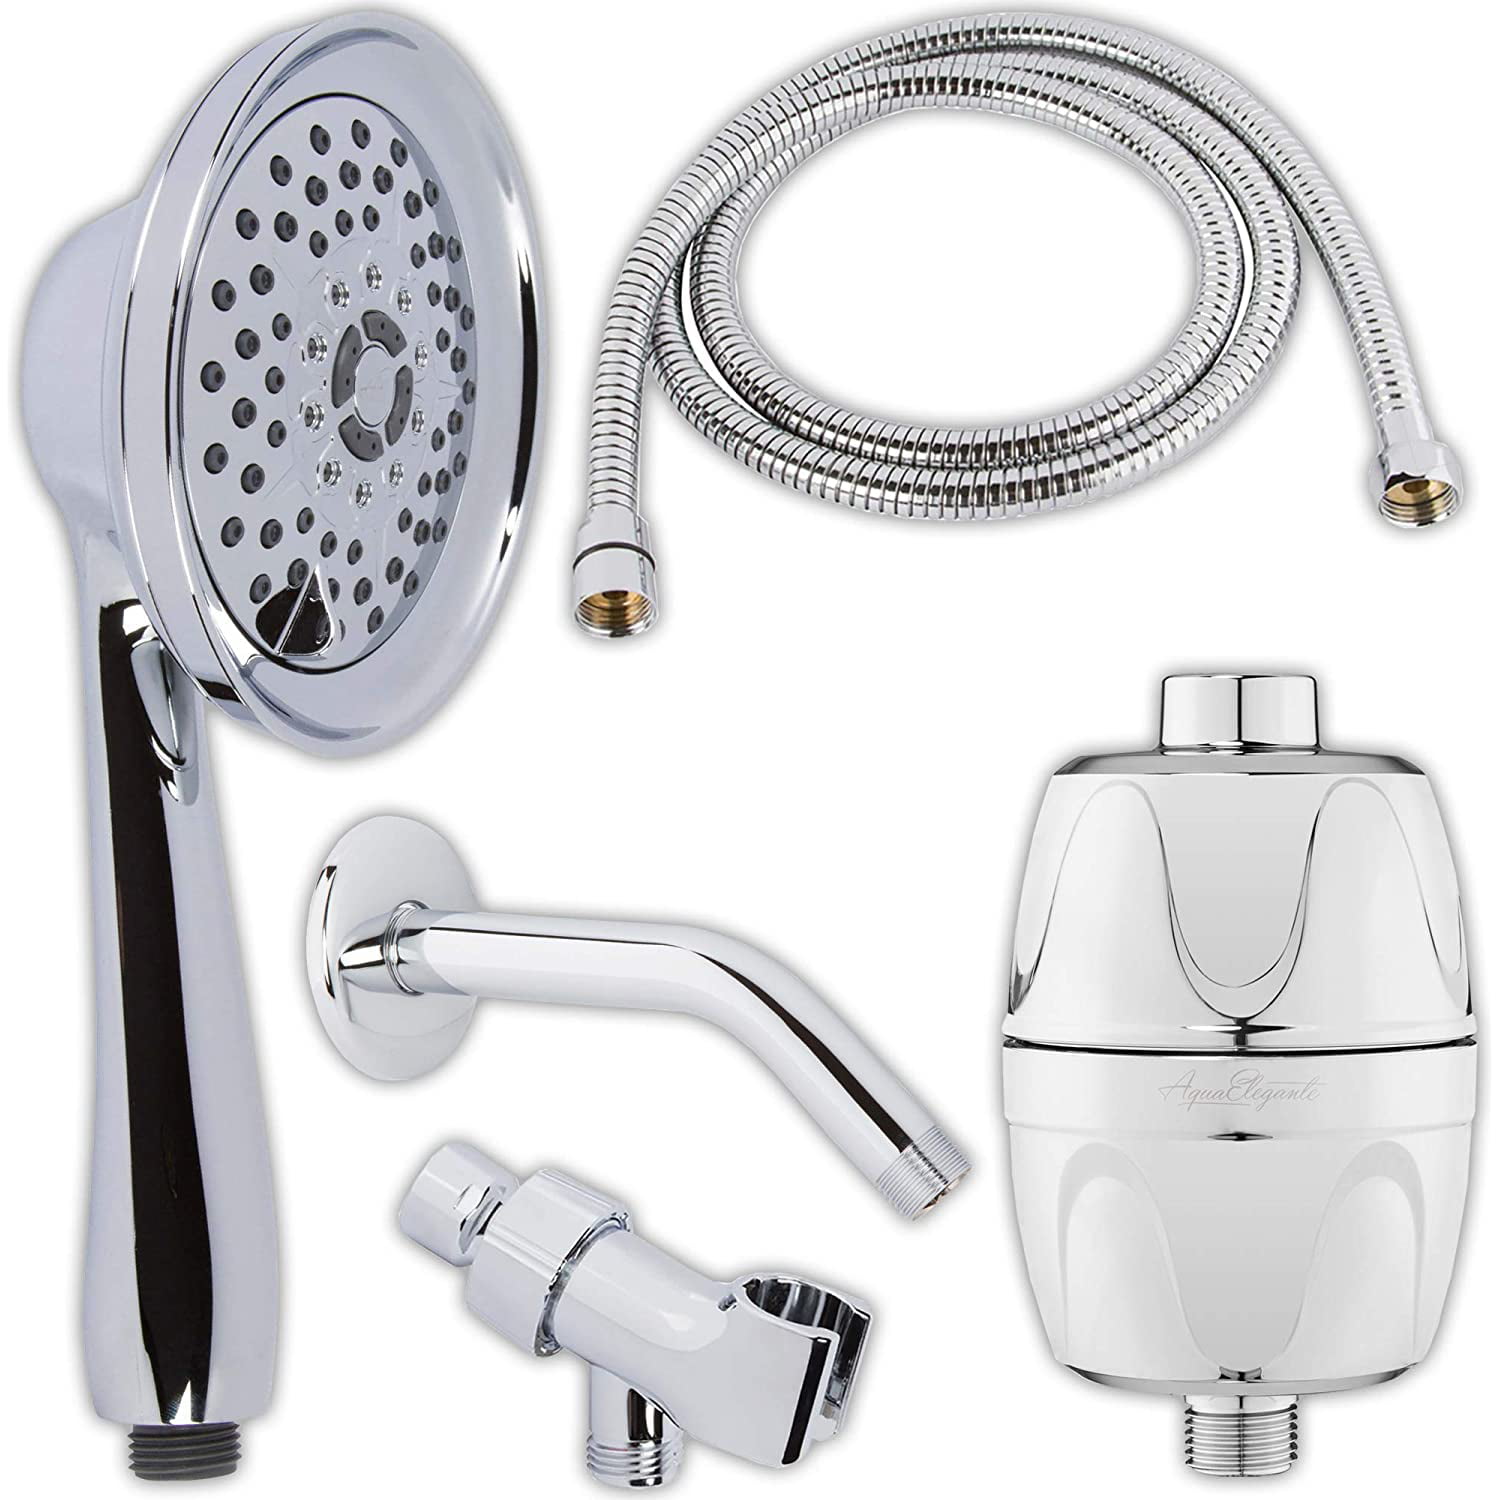 High Pressure Massage Spray In Hand Held Showerhead With Mount And Stainless Steel Hose Handheld Massager Shower Head Kit Arm Filter To Remove Chlorine Brushed Nickel 2.5 GPM Filter 